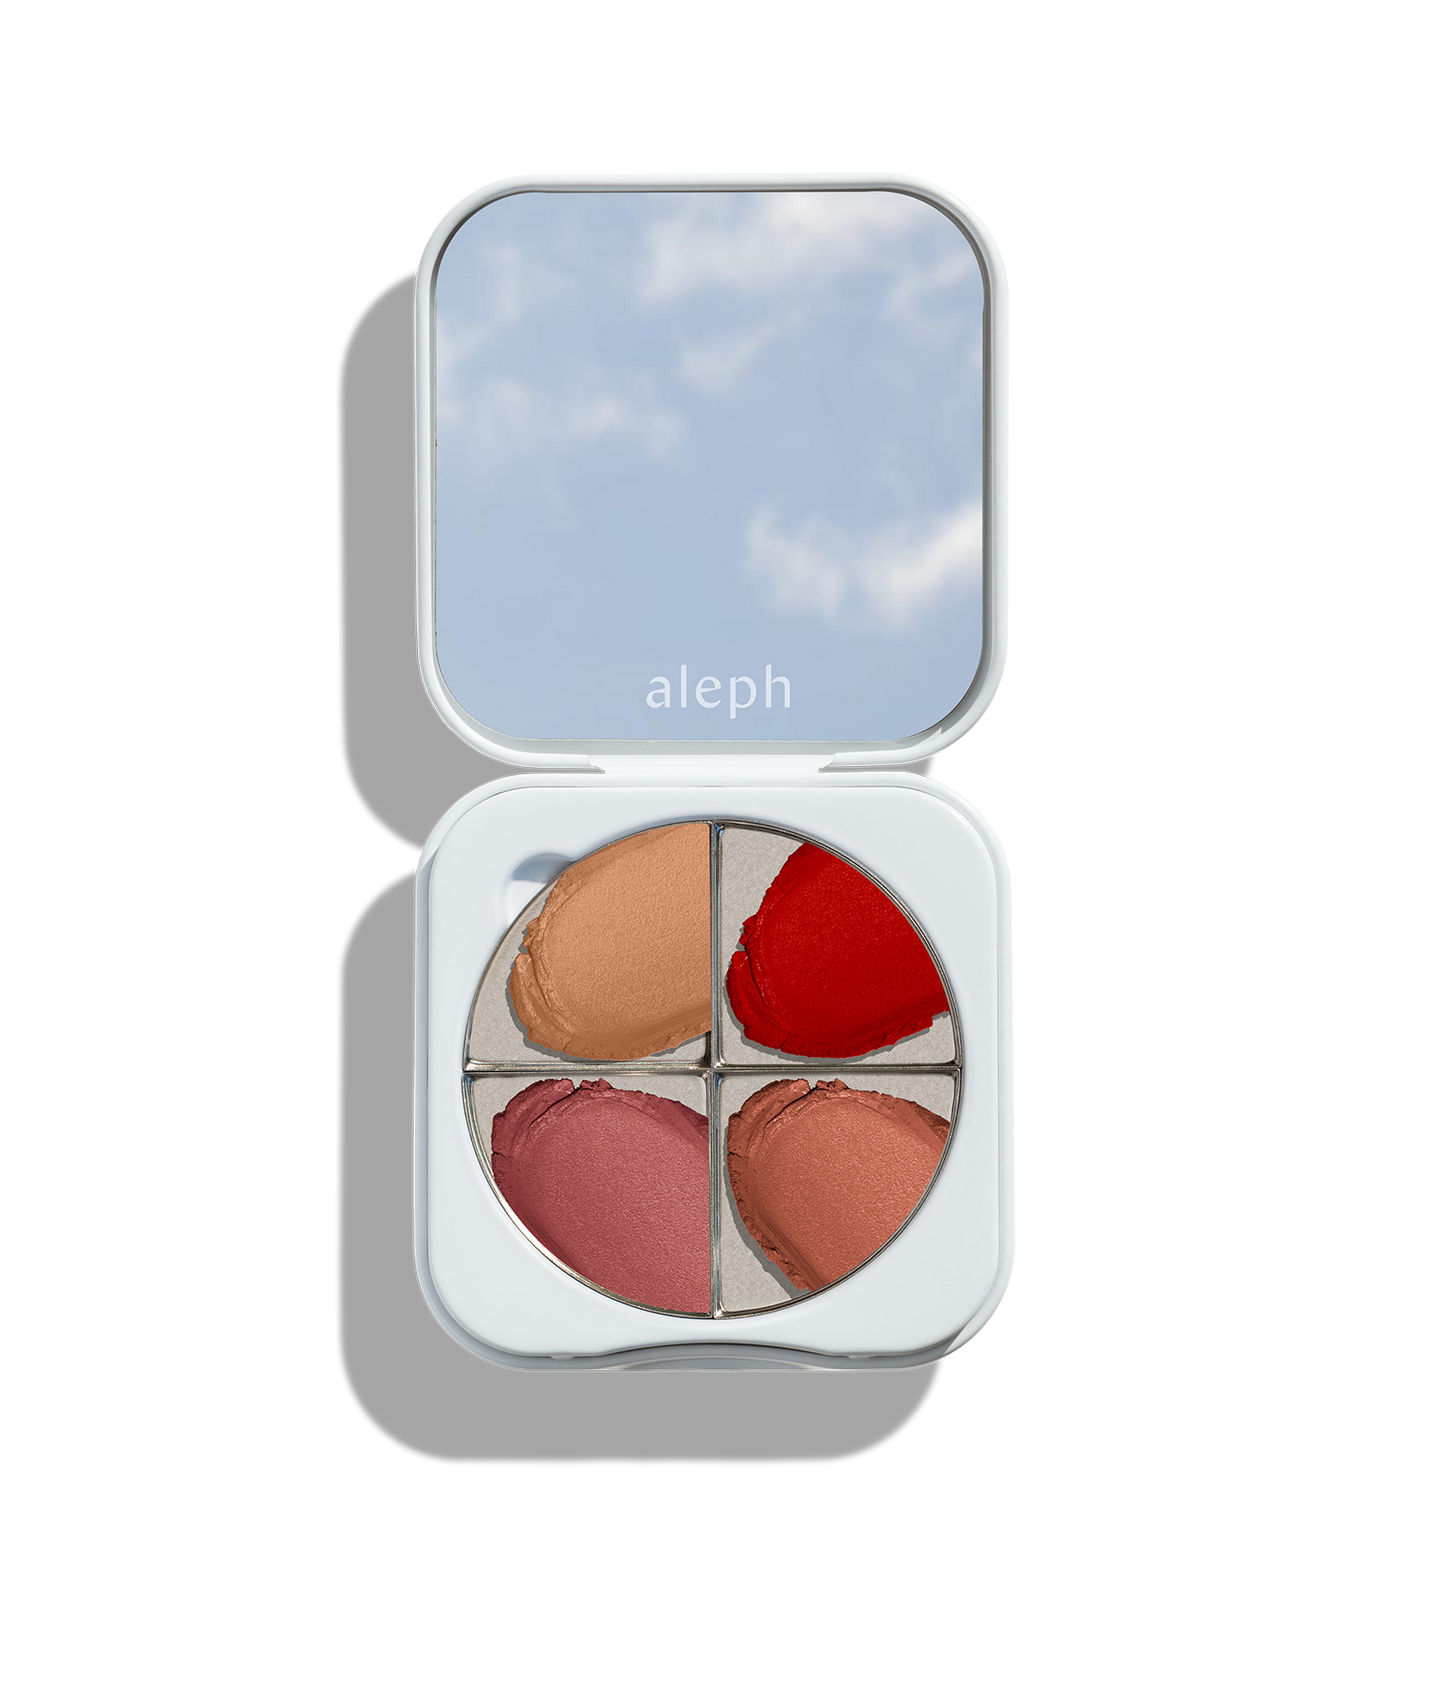 Aleph Mixing Compact